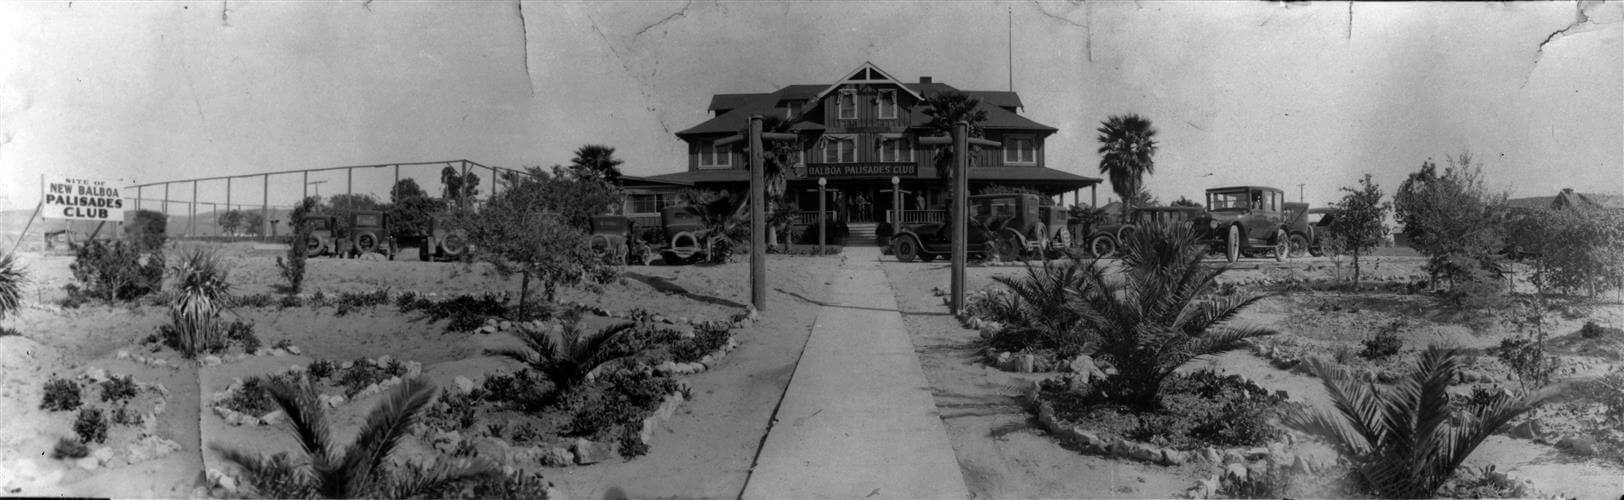 front view of the Hotel Del mar in the early 1900s